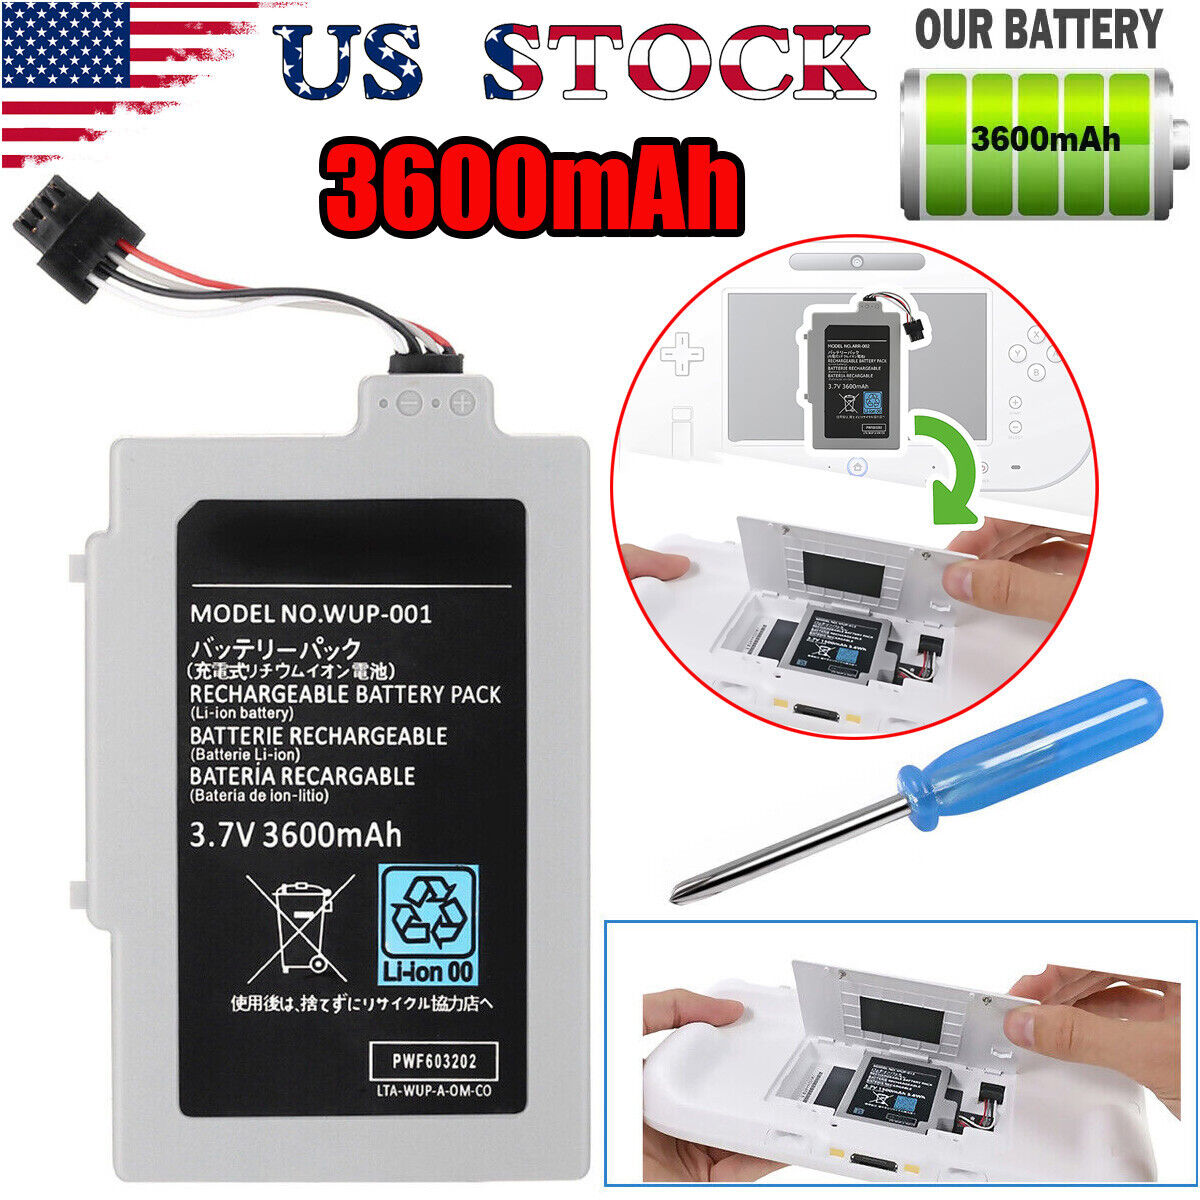 Rechargeable Extended Battery Pack For Nintendo Wii U Gamepad 3600mAh 3.7V OEM Unbranded